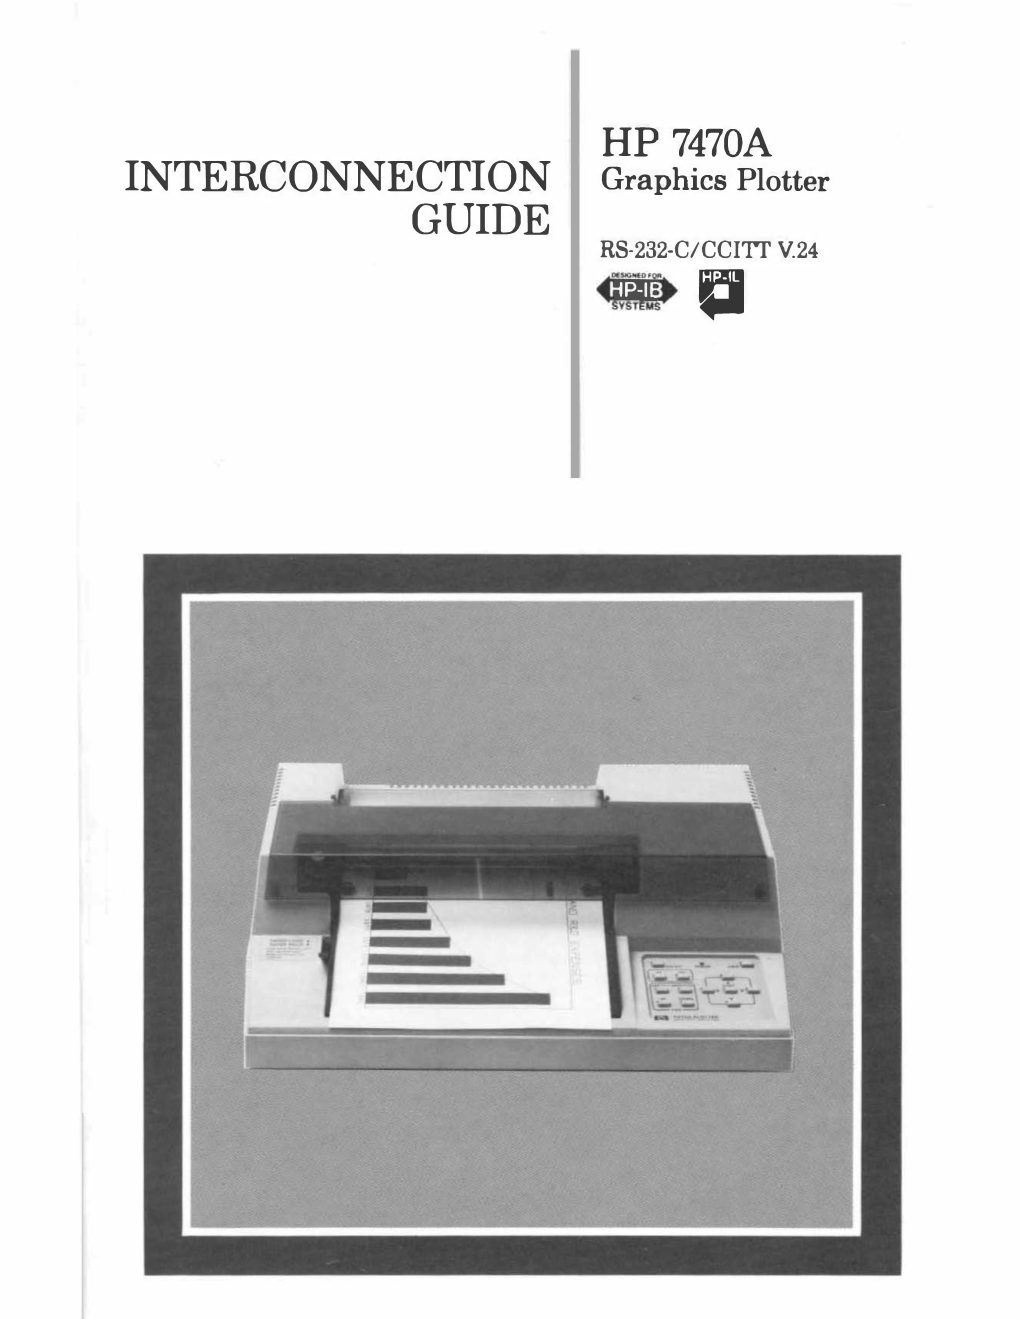 HP 7470A INTERCONNECTION Graphics Plotter GUIDE RS-232-C/CCITI V24 �:I:;El:� SYSTE MS .-,,� G Table of Contents